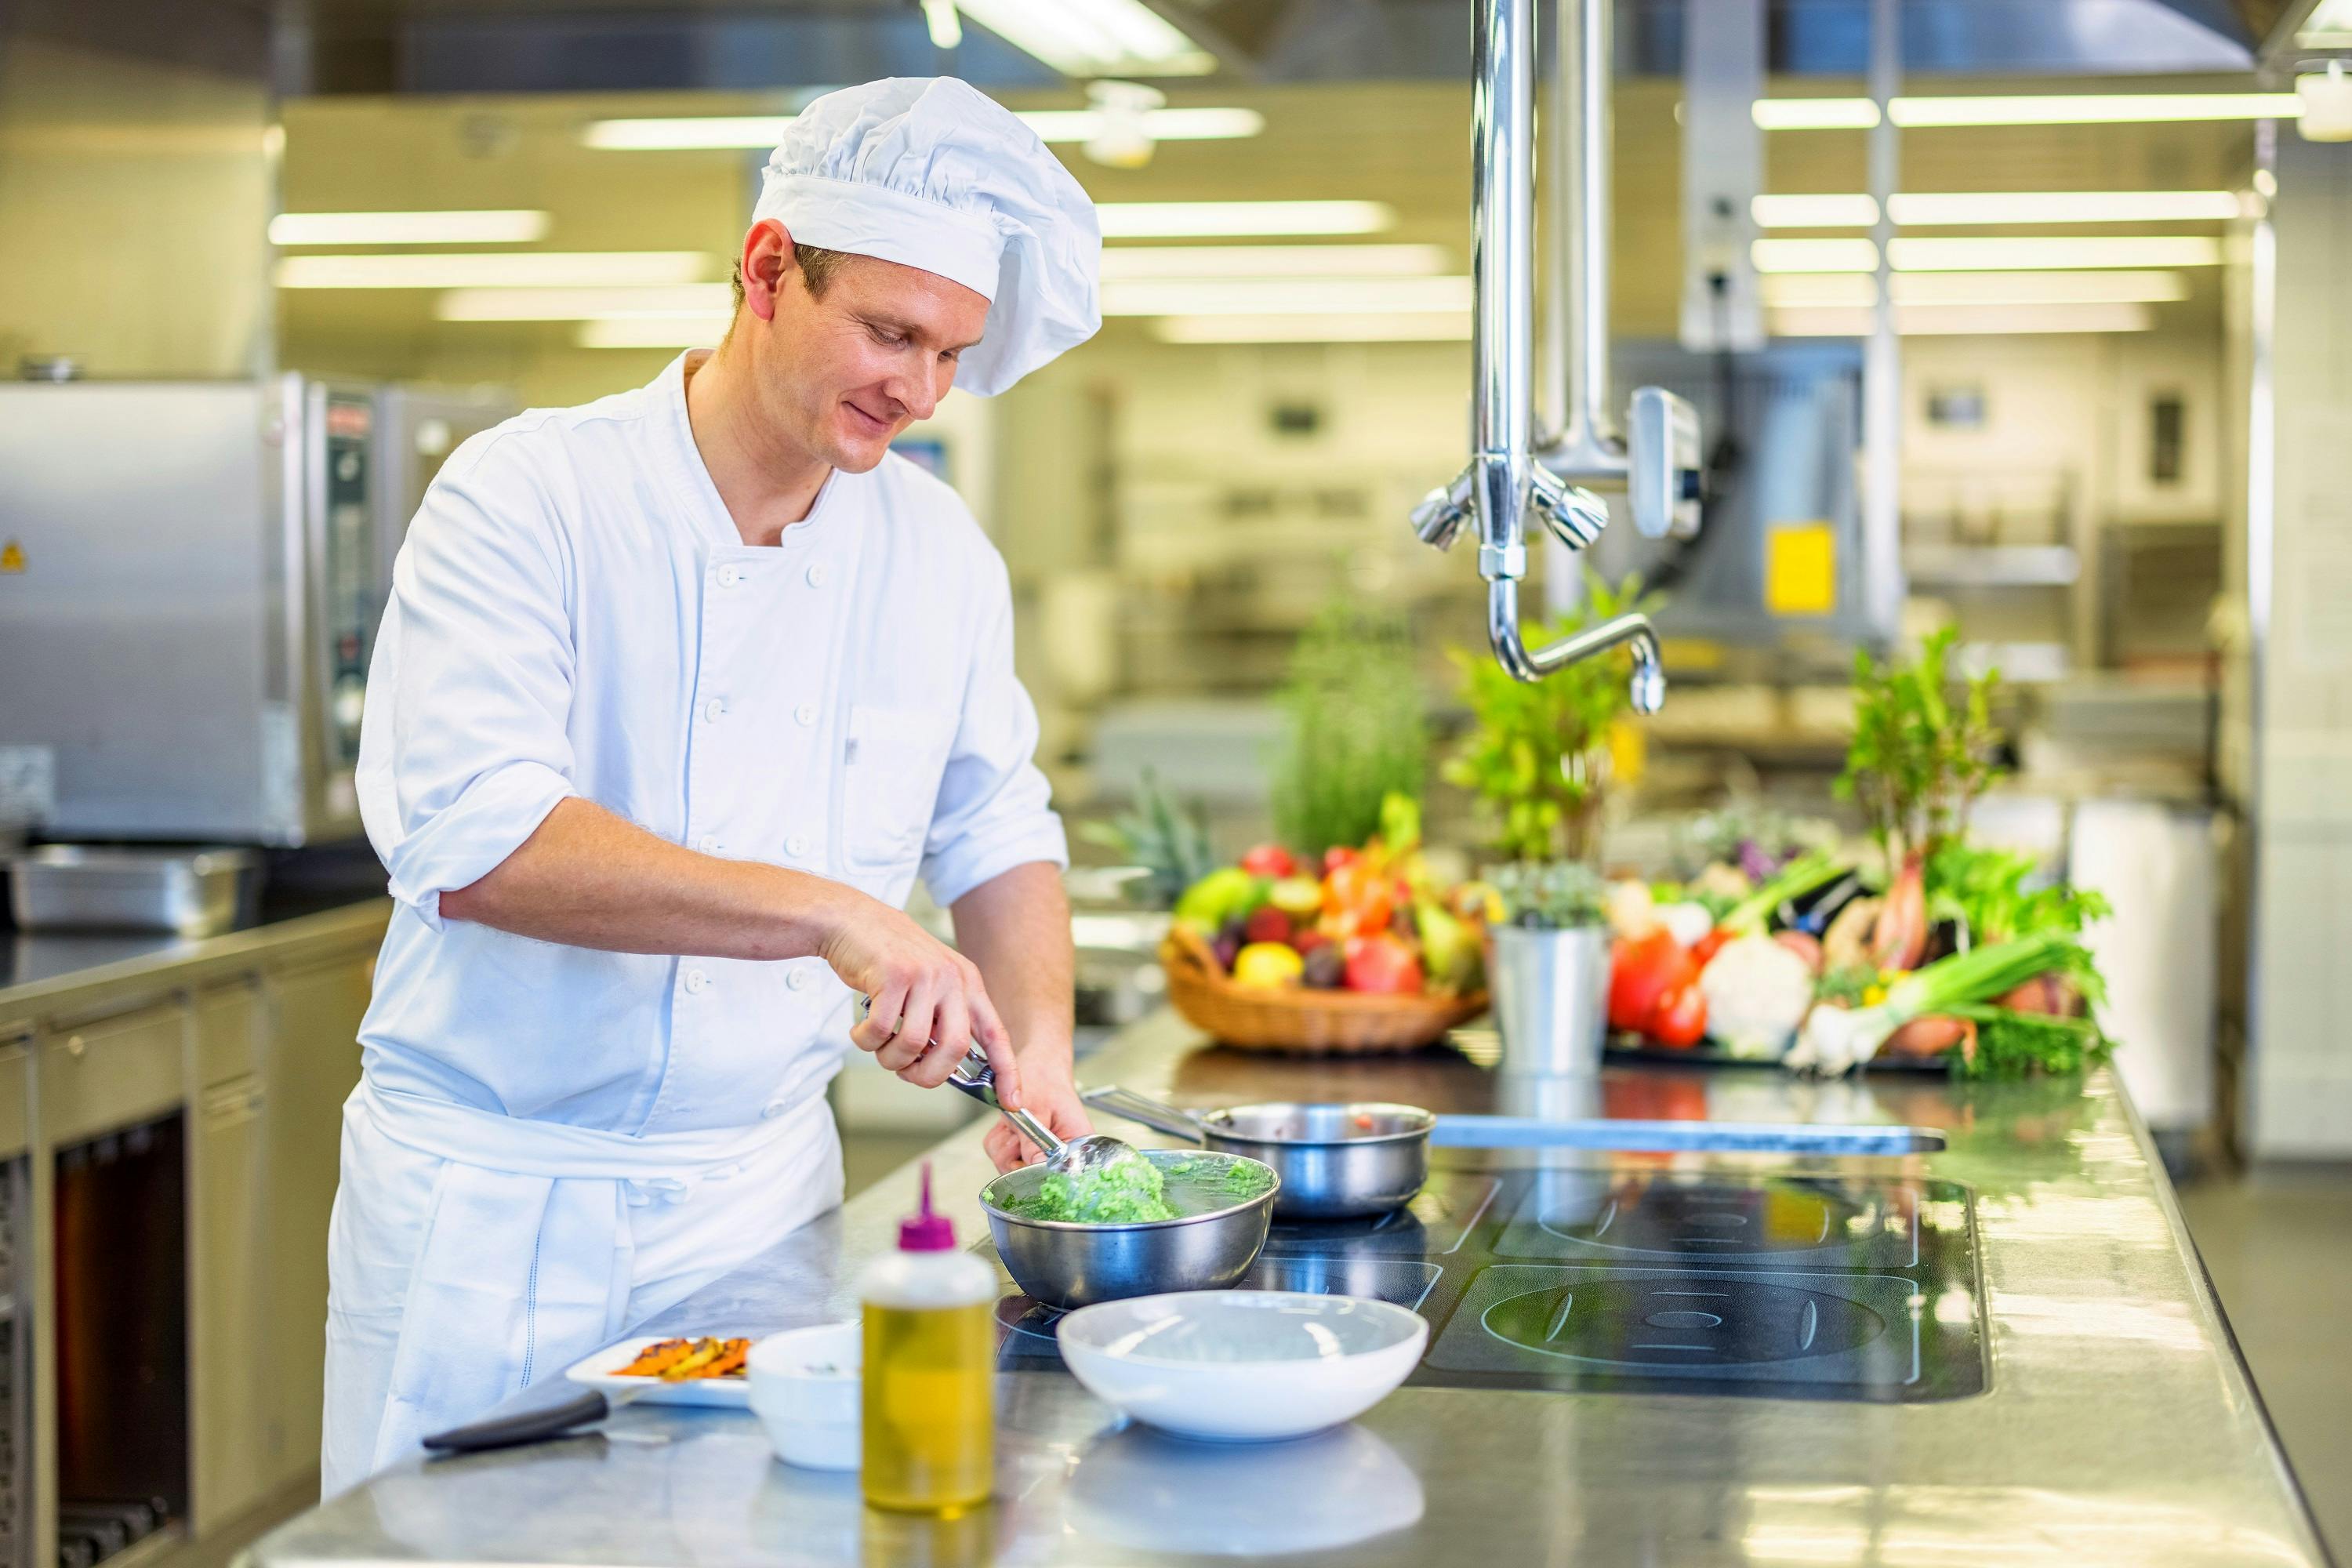 Cook in white uniform prepares food in a professional kitchen.